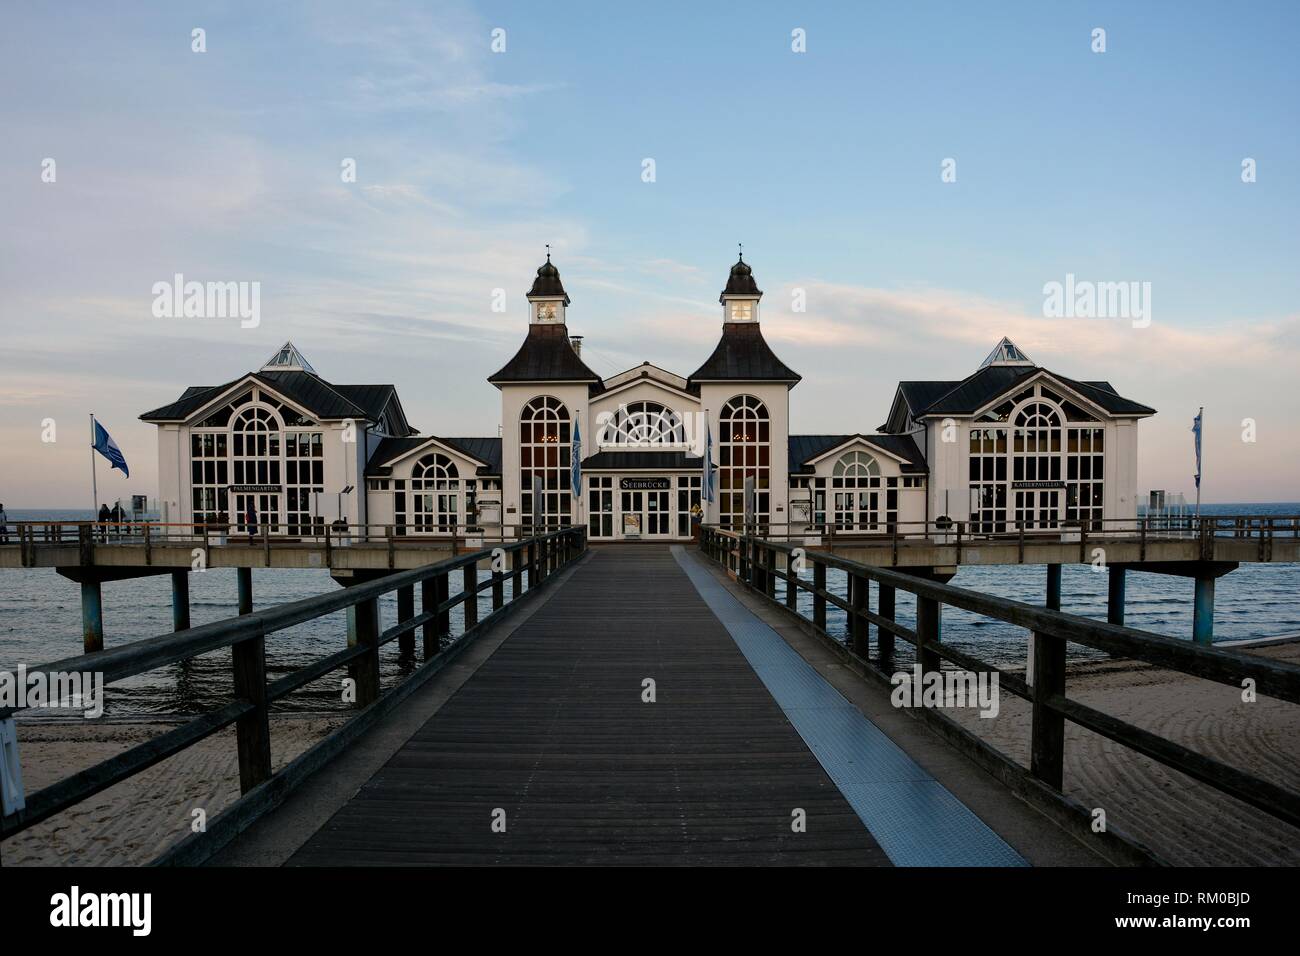 Back of the historic pier in Sellin on Rügen in Germany with wooden bridge Stock Photo